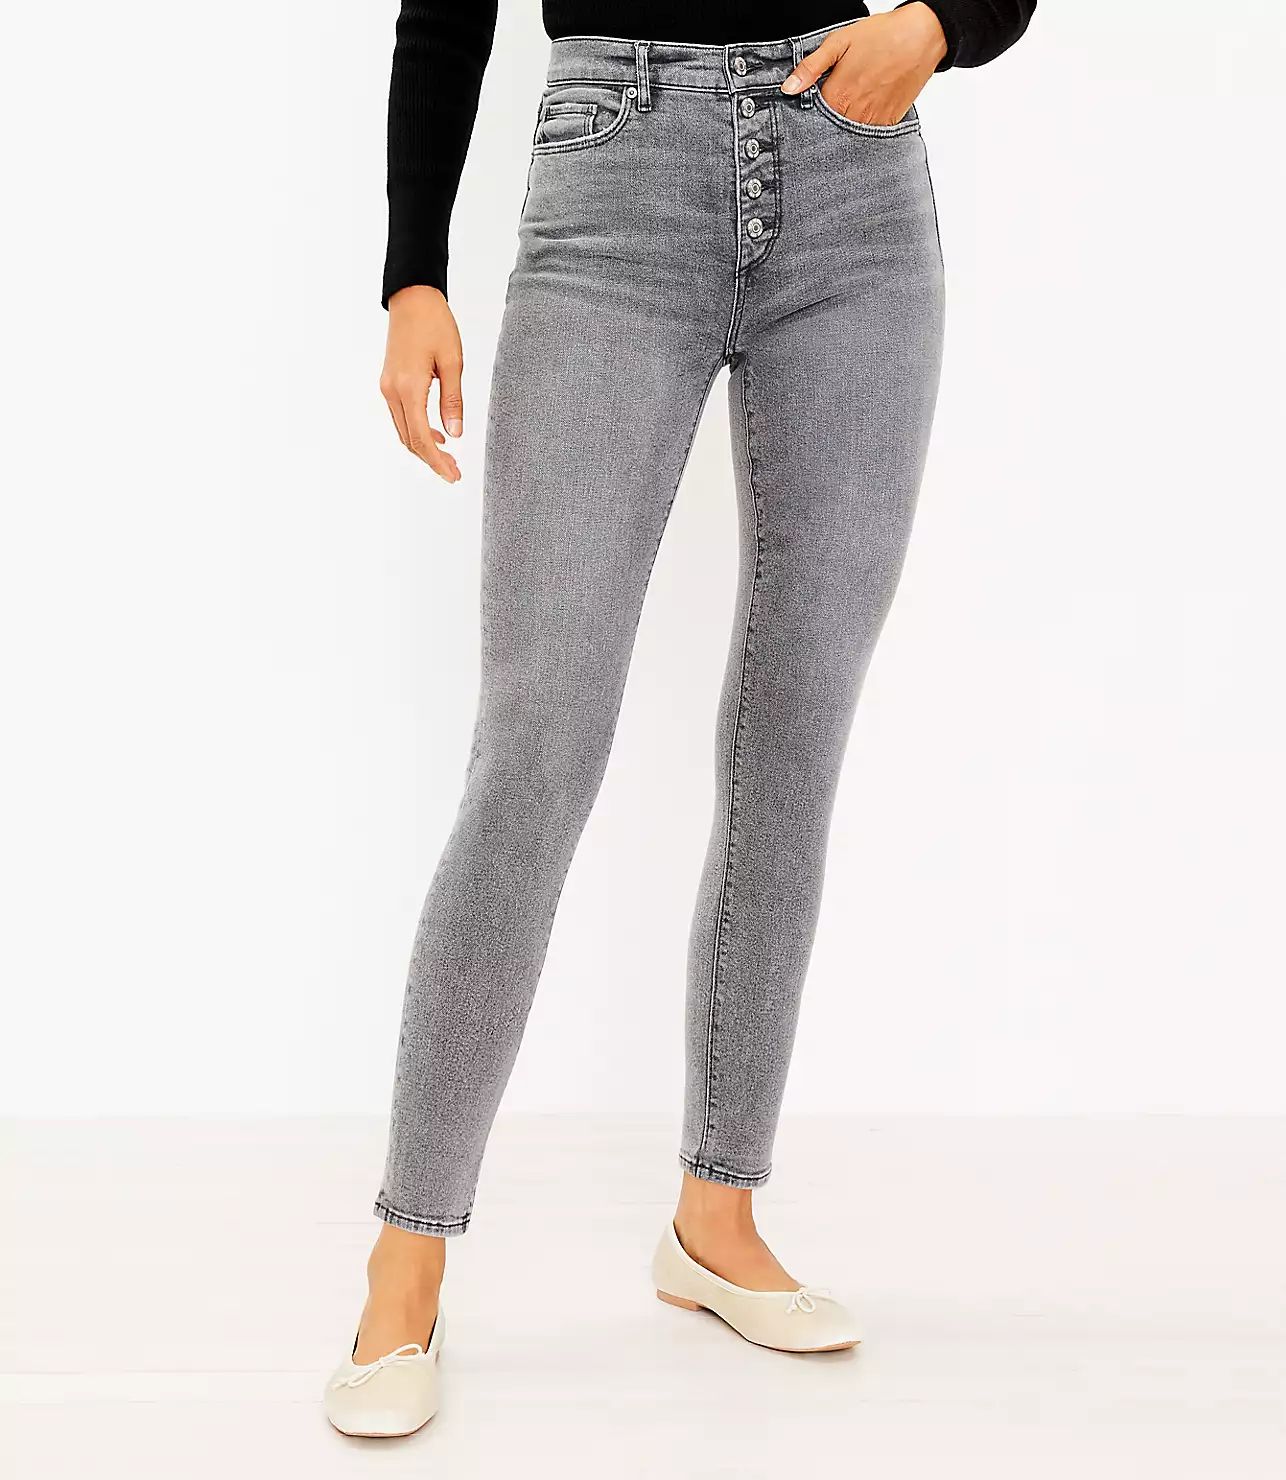 Button Front High Rise Skinny Jeans in Vintage Grey Wash | LOFT